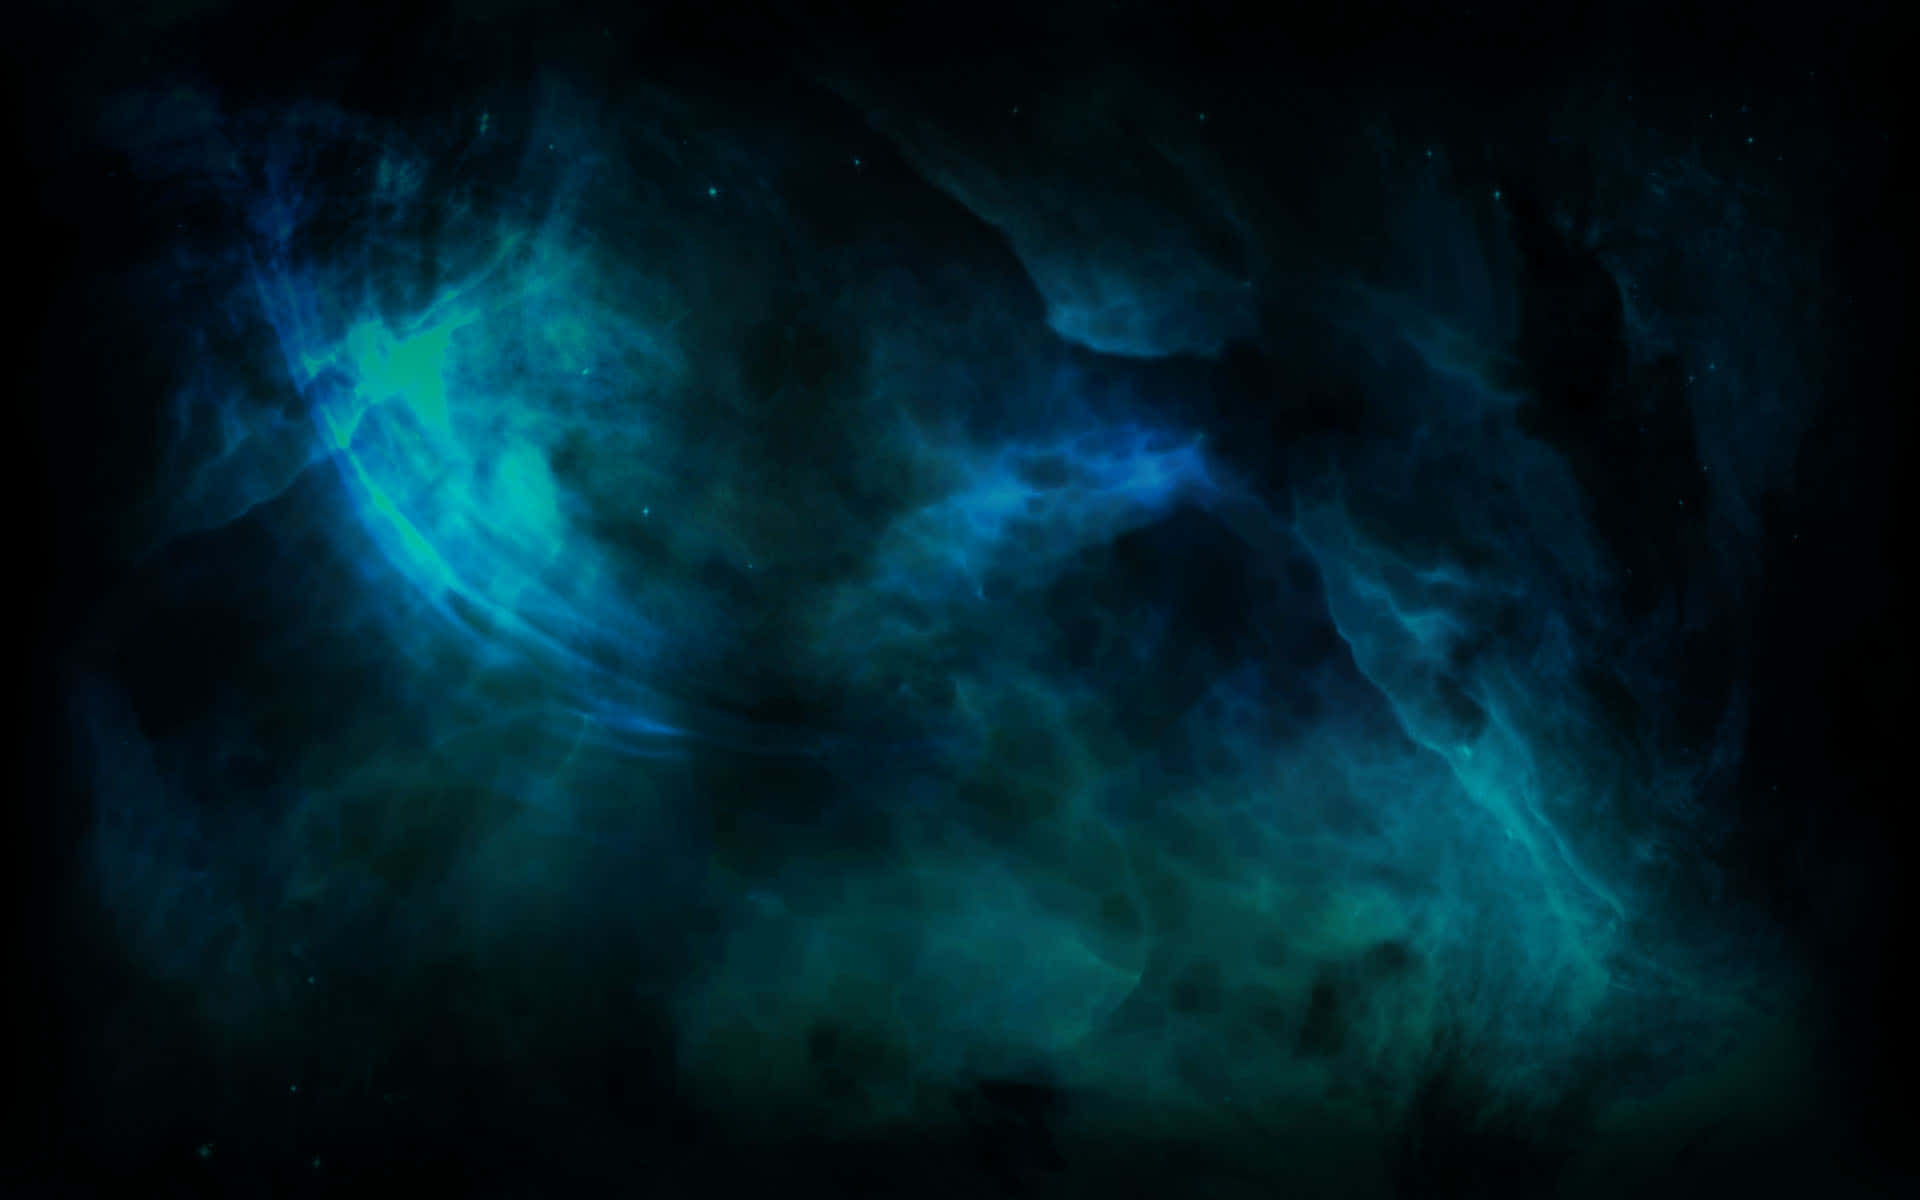 A Blue And Green Nebula With A Black Background